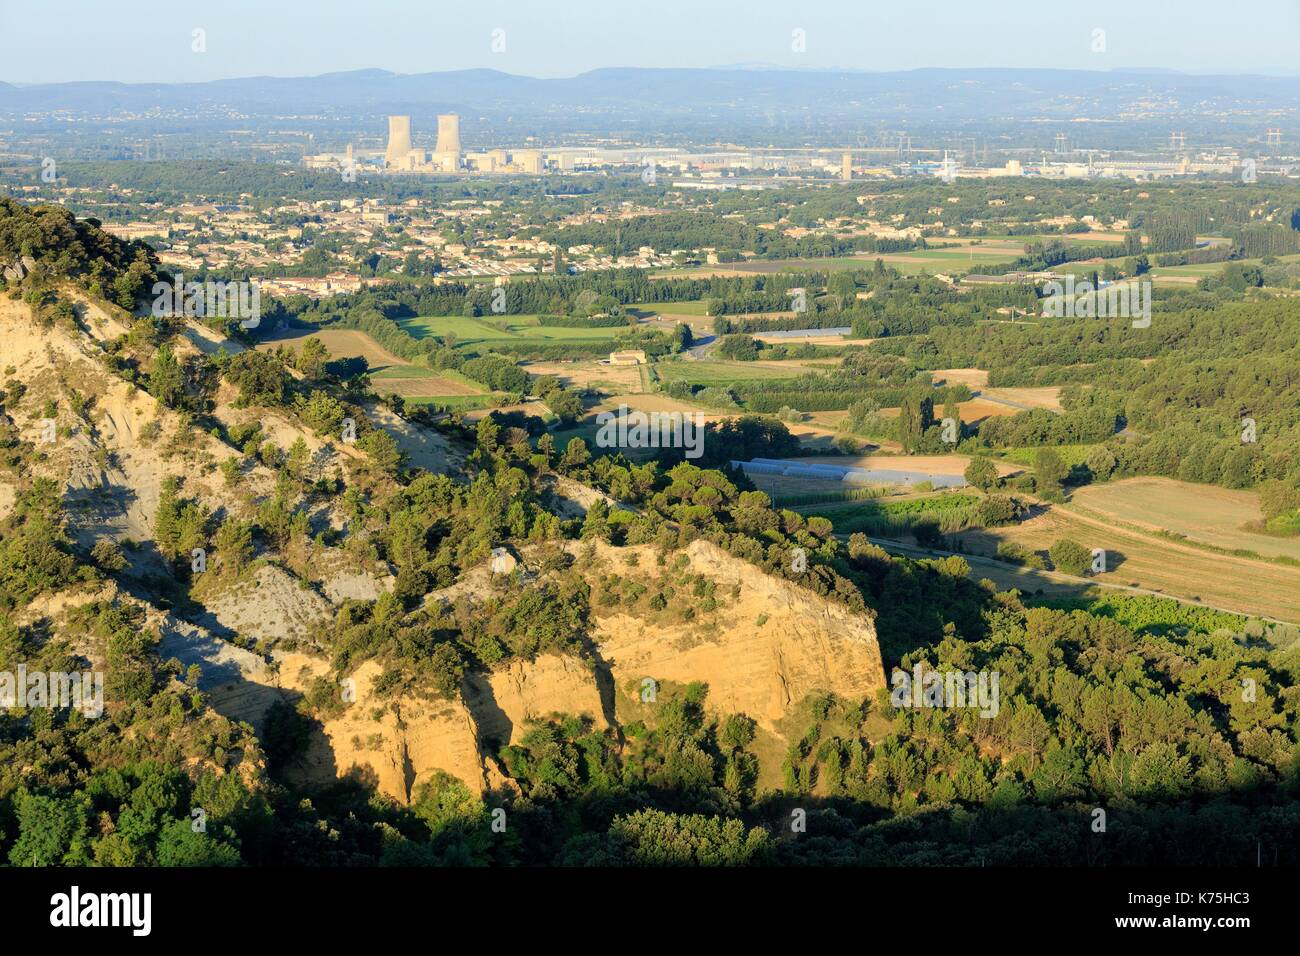 France, Vaucluse, Bollene, Tricastin nuclear power plant in the background (aerial view) Stock Photo